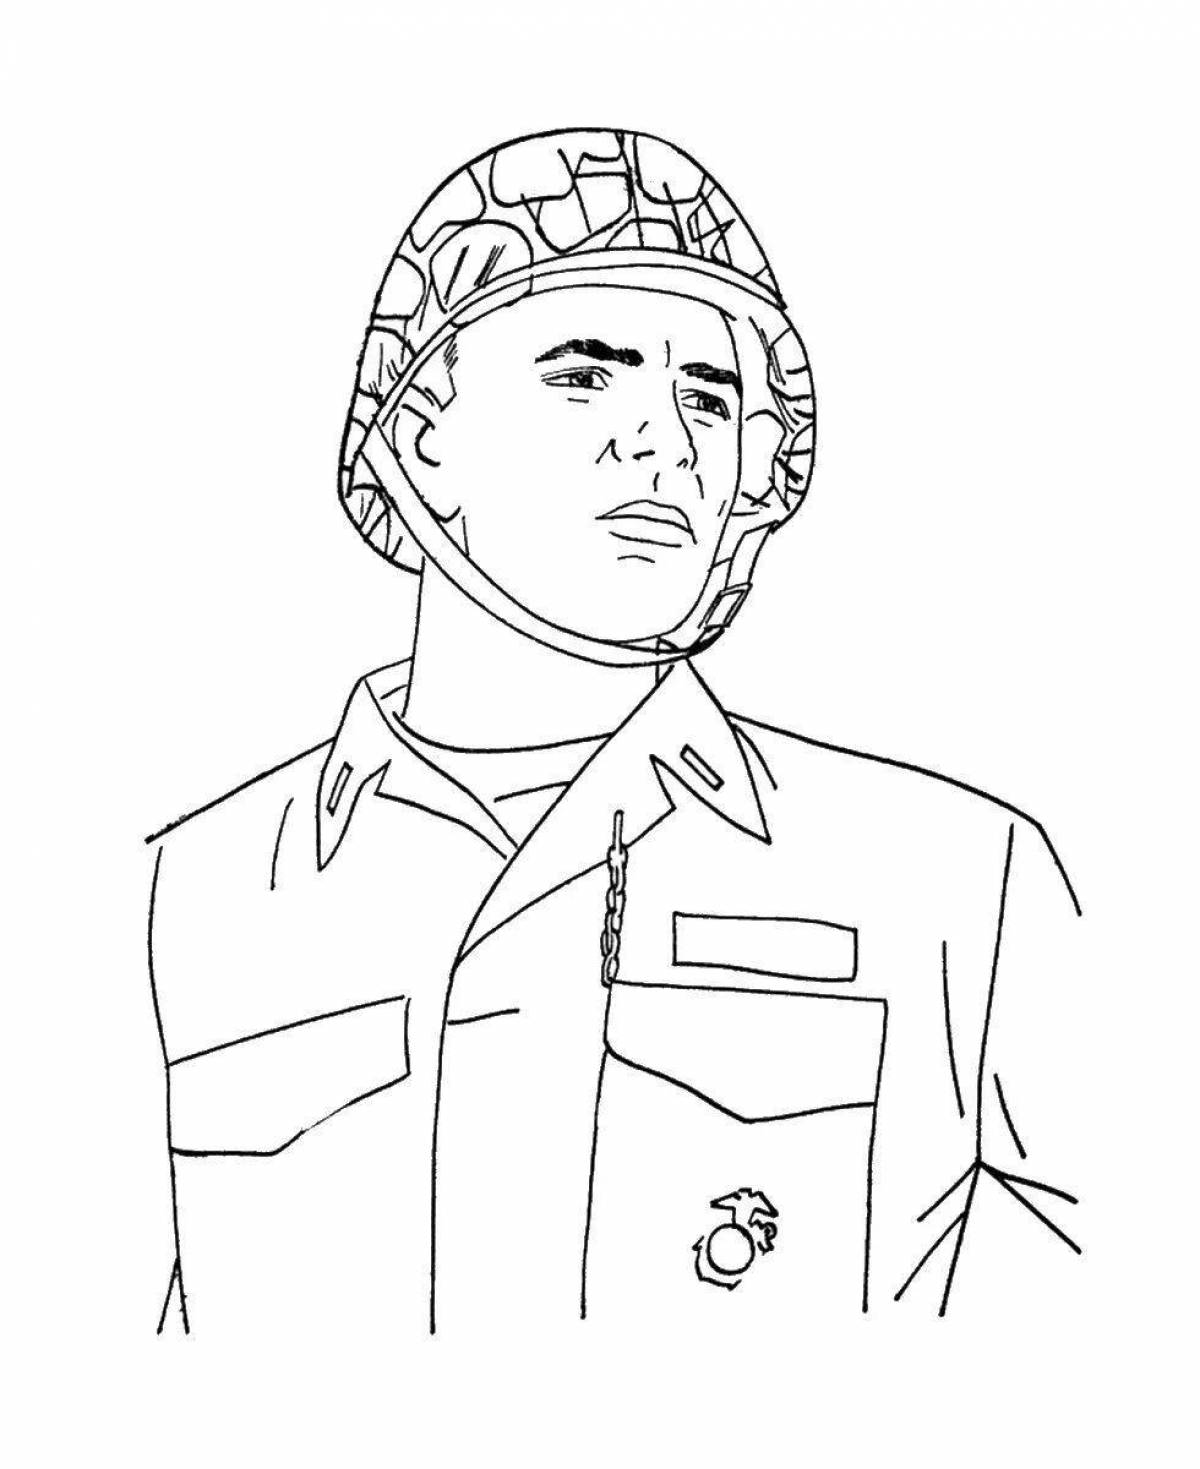 Majestic coloring pages heroes of our time